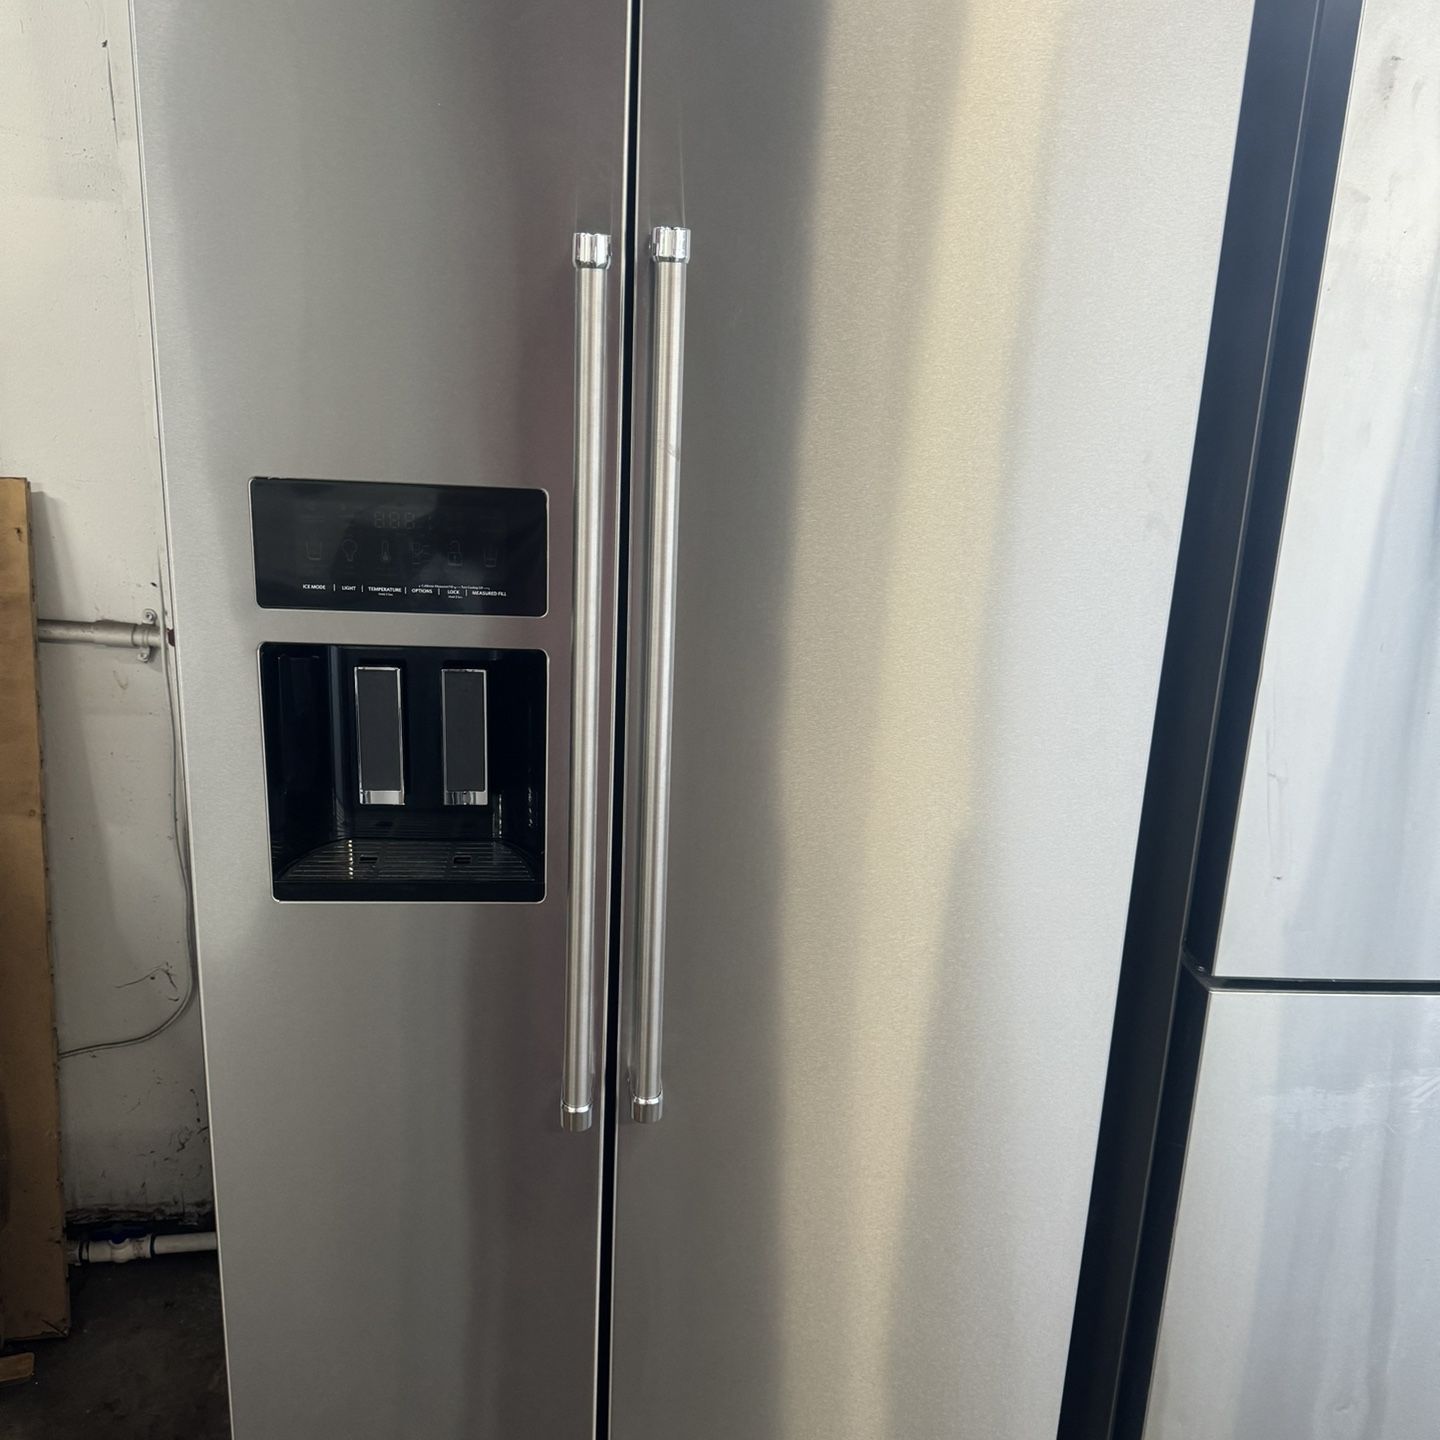 USED KITCHEN AID SIDE BY SIDE REFRIGERATOR 